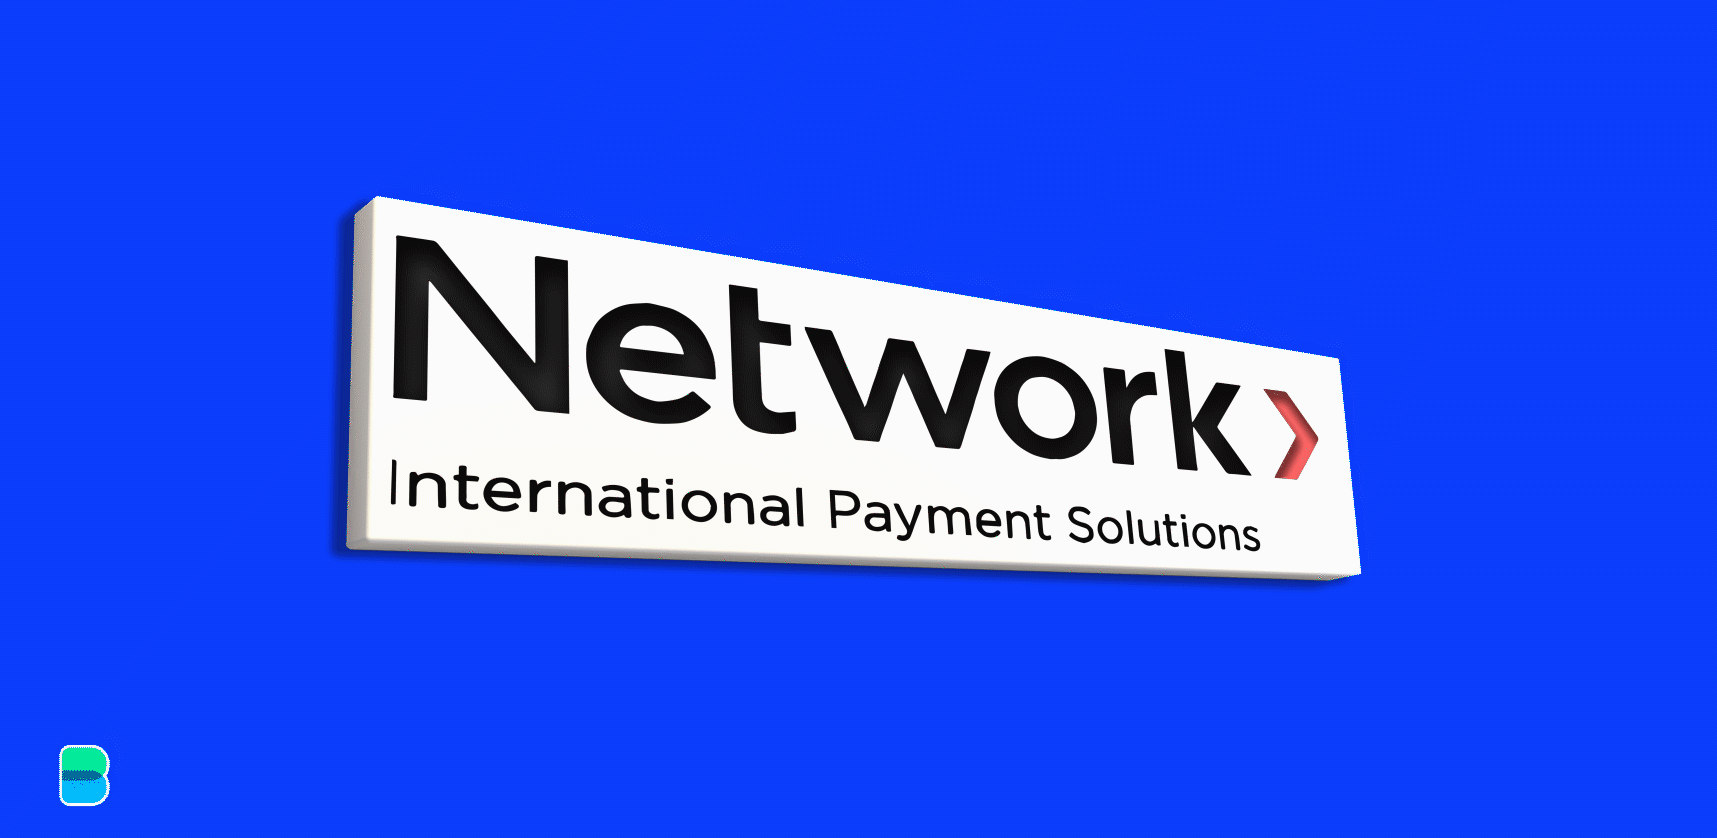 Network International ends 2020 on a not-so-positive note